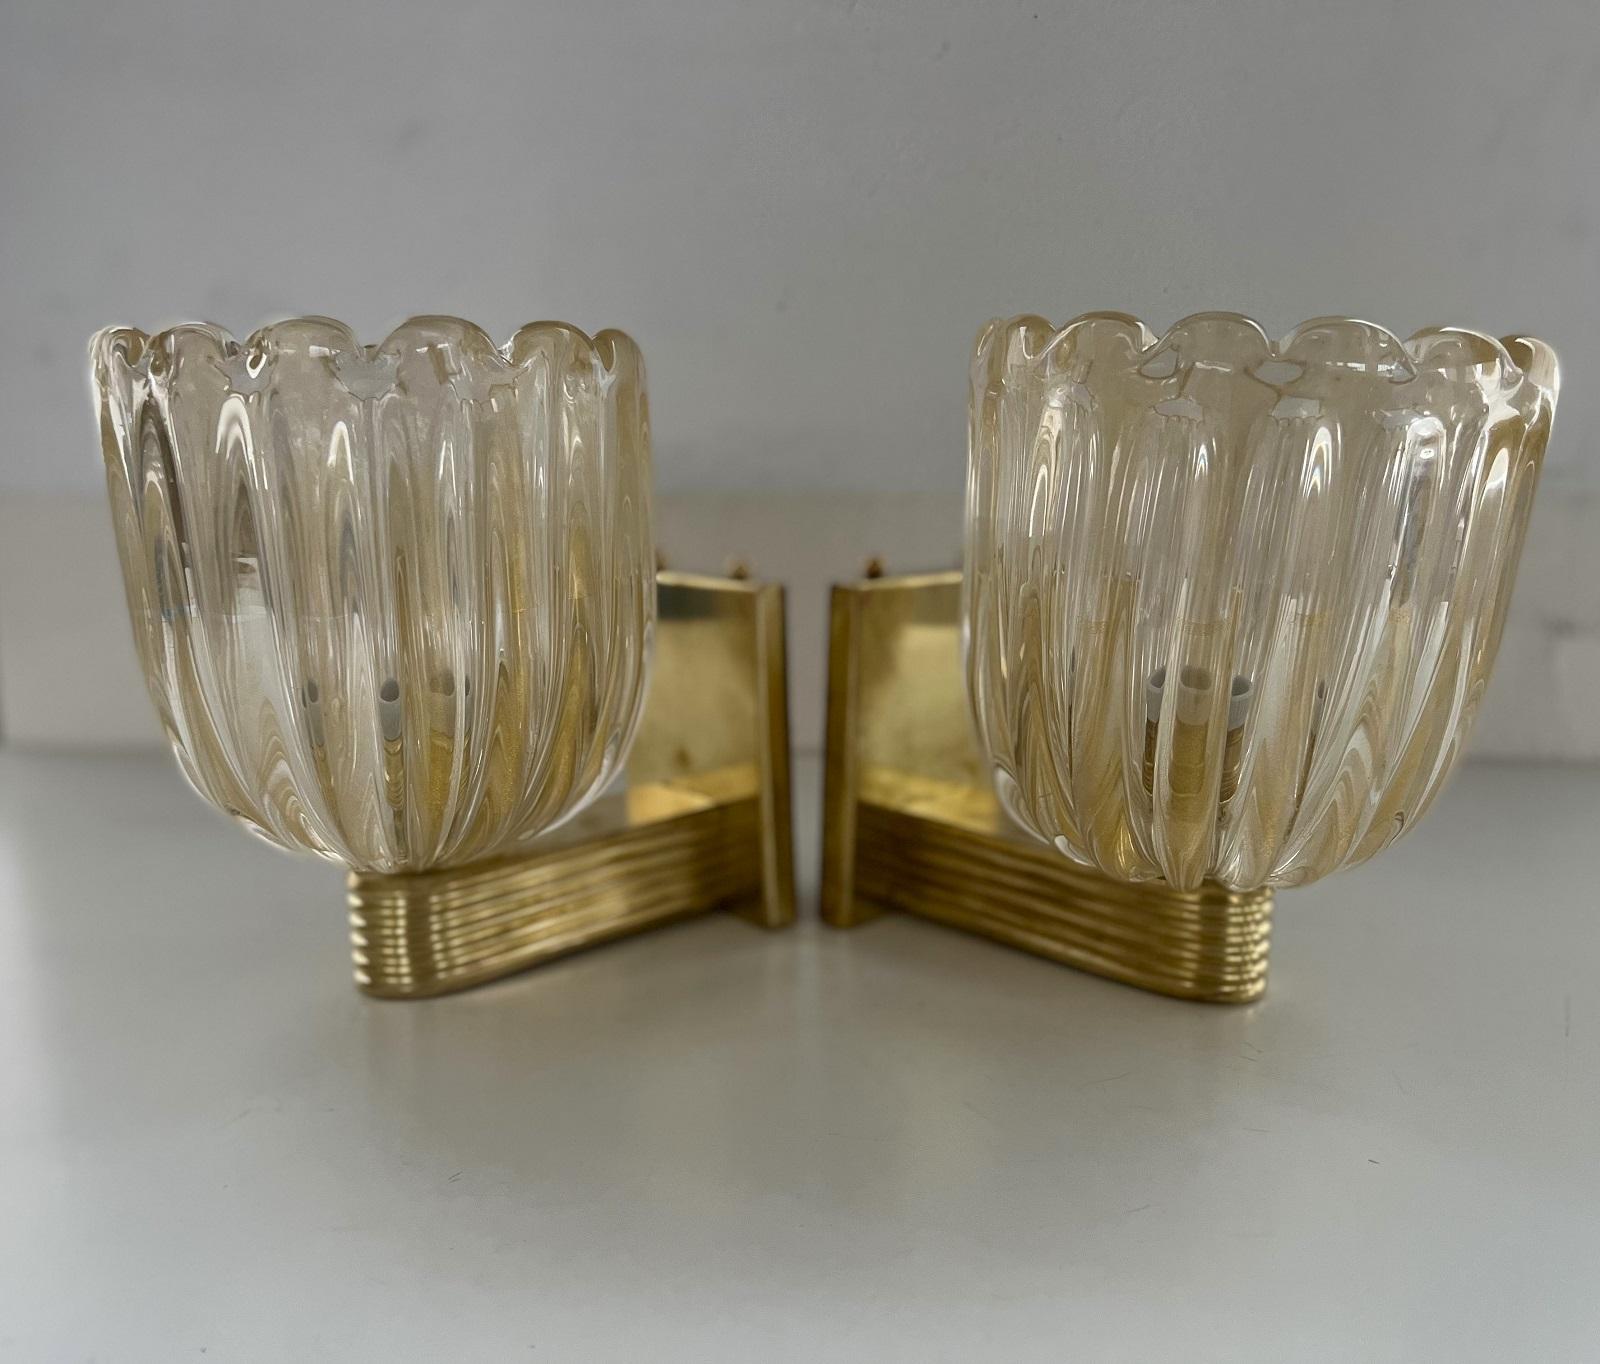 Italian Brass and Murano Glass Wall Lights or Sconces in Art Deco Style, 1990s For Sale 3